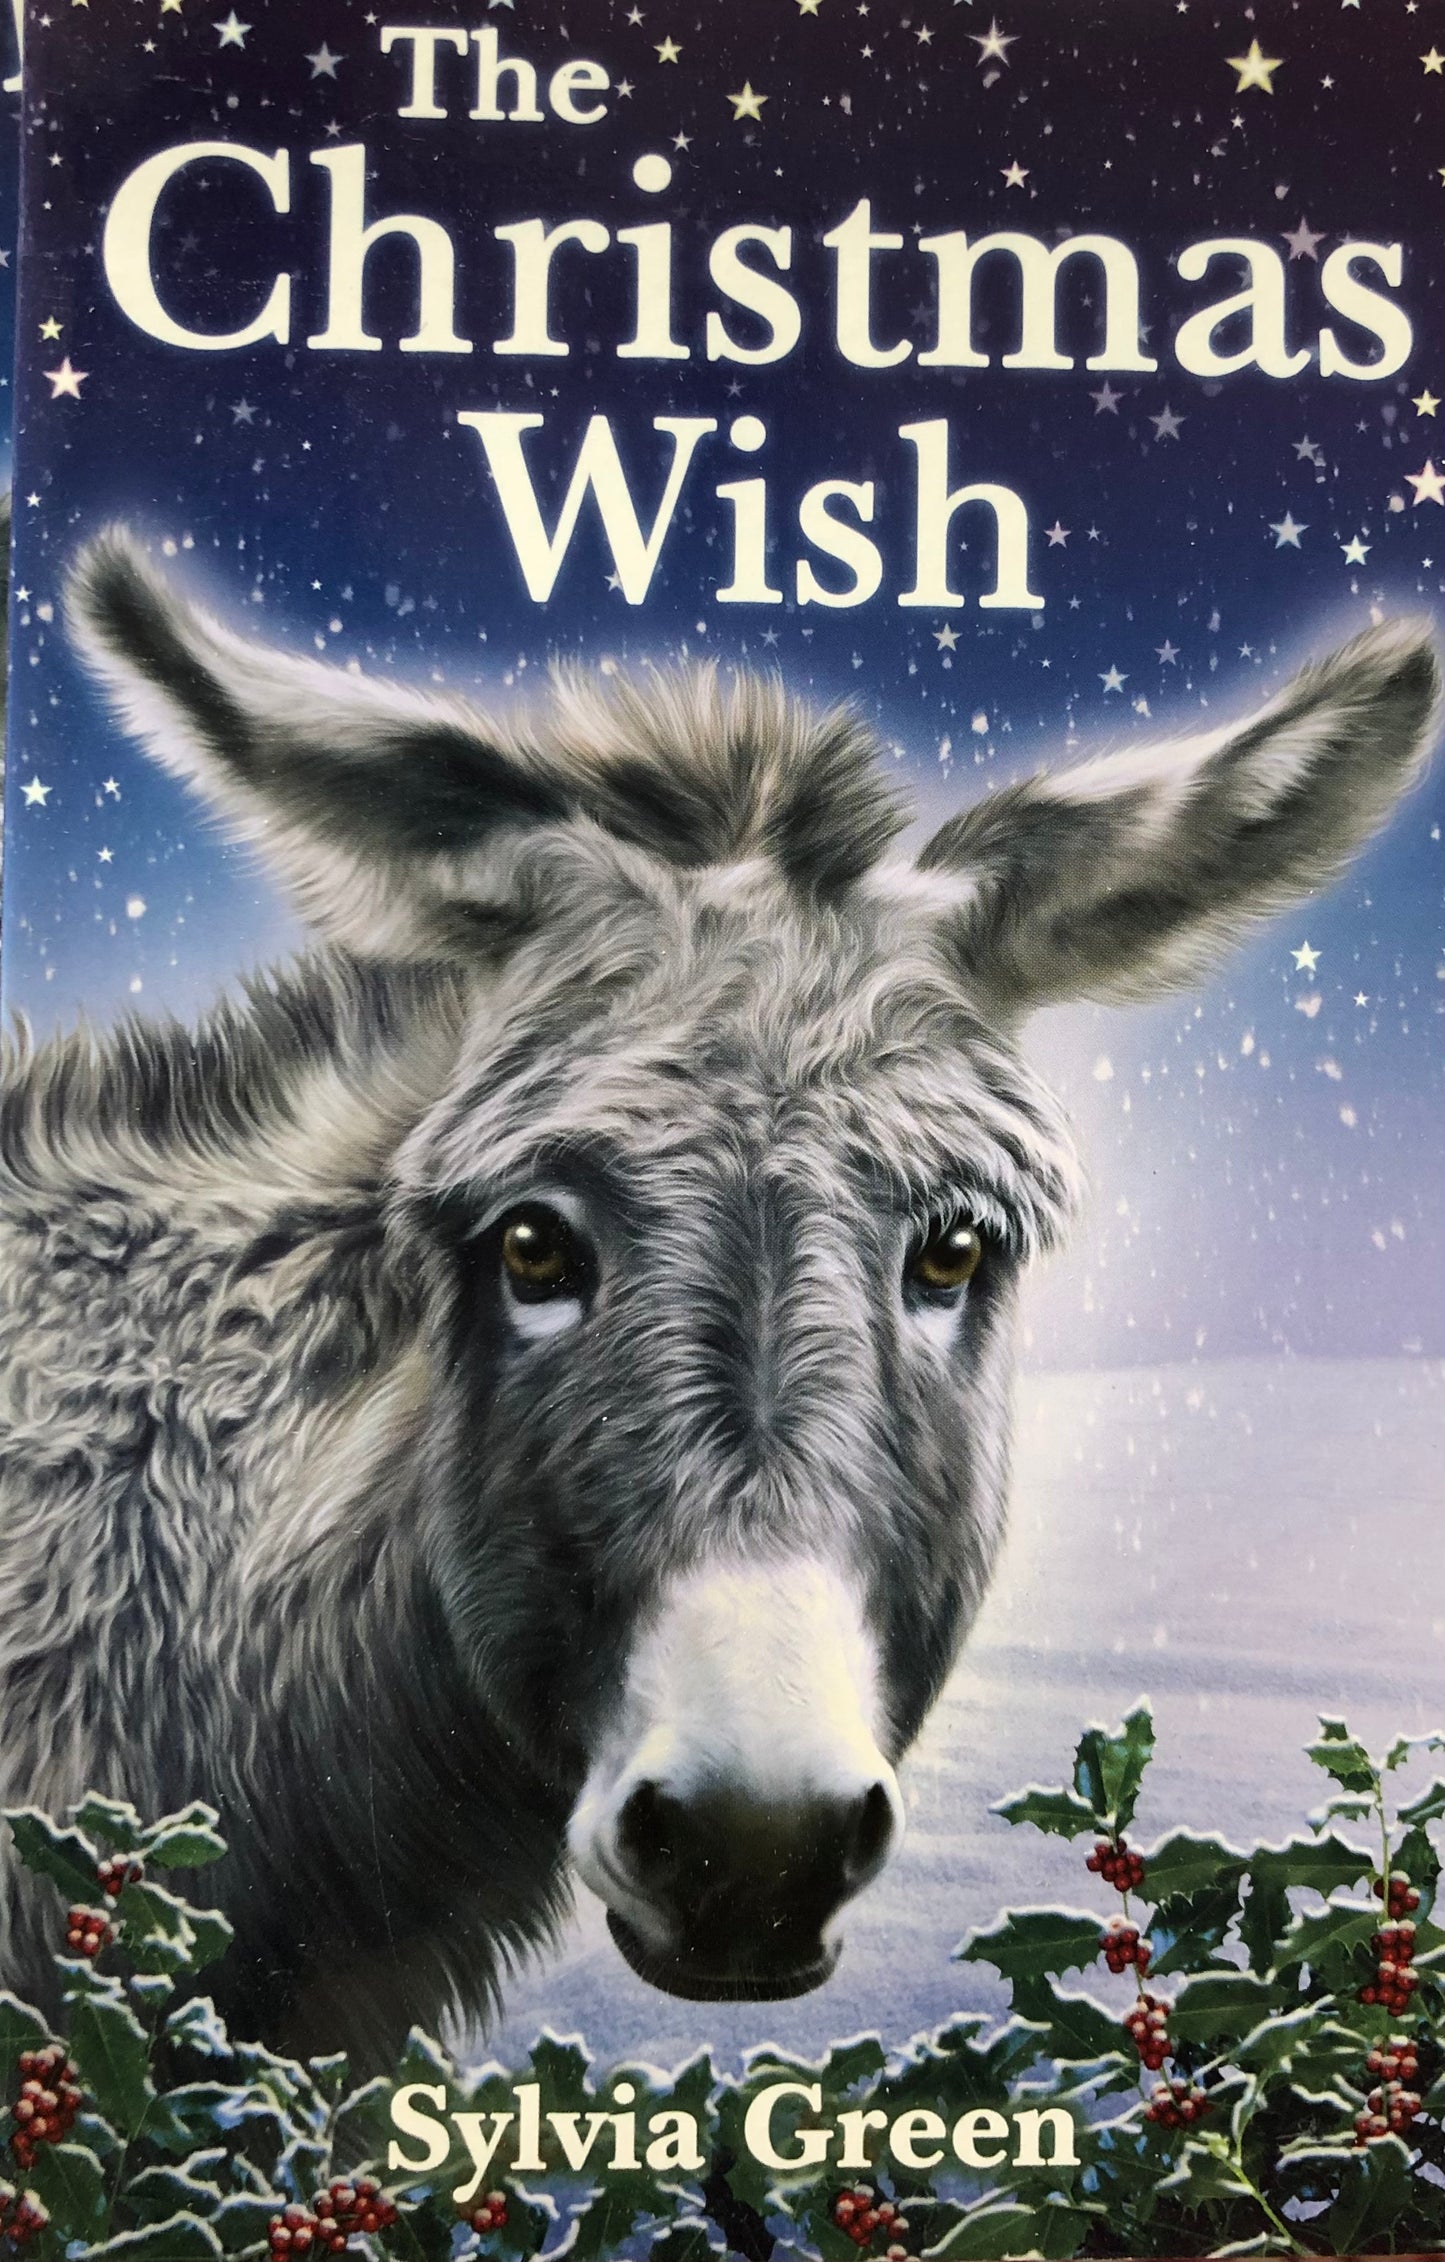 The Christmas Wish by Sylvia Green